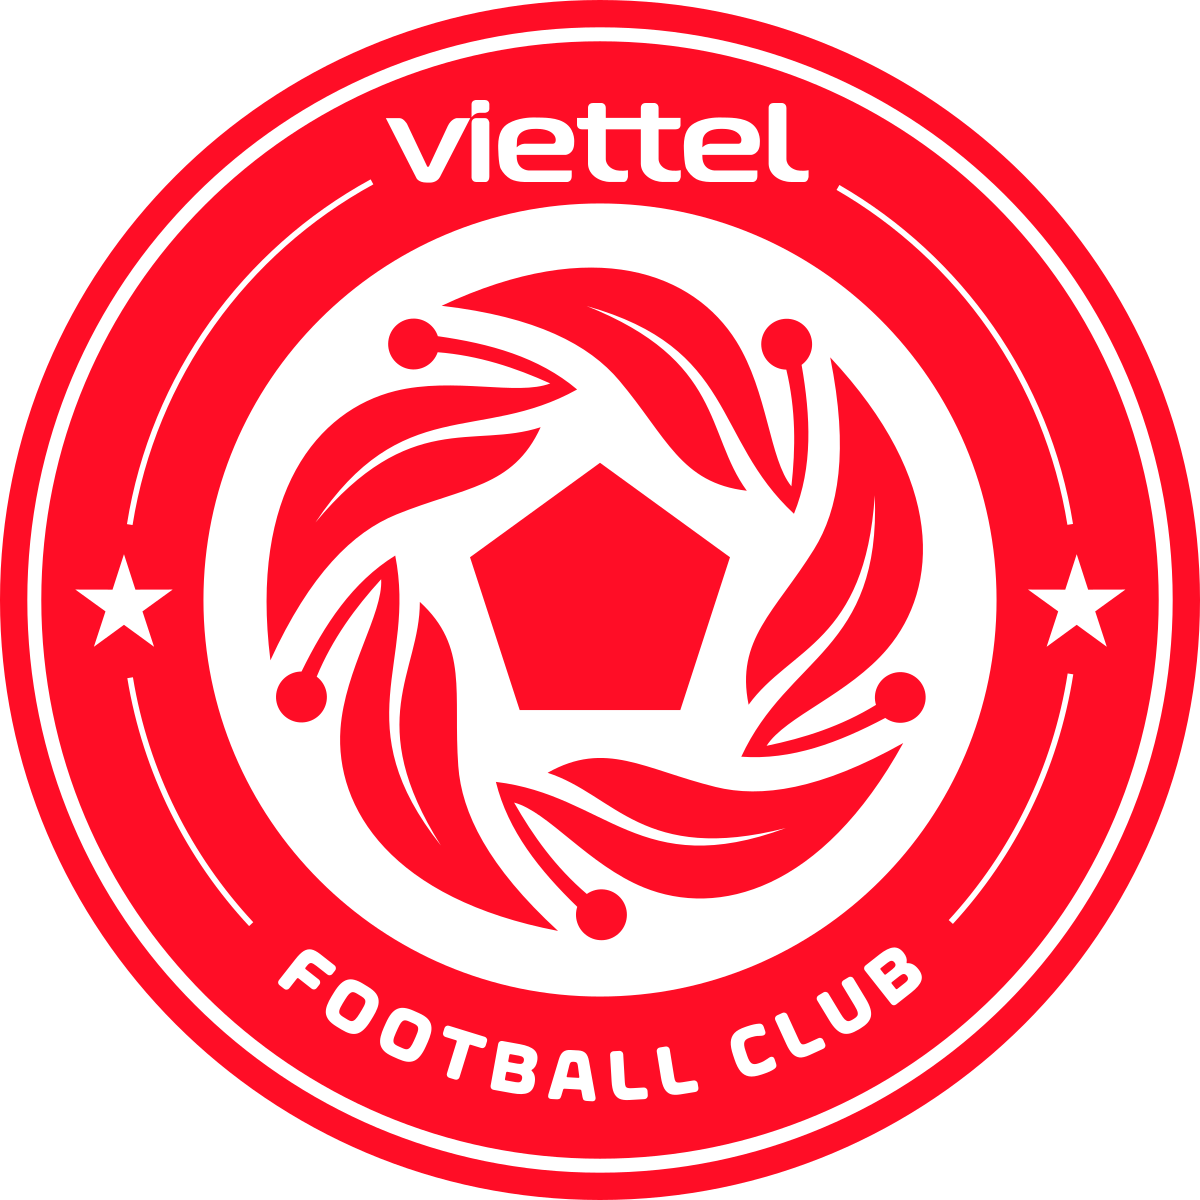 Viettel vs Becamex Binh Duong Prediction: We Expect The Home Side To Be Pertulent